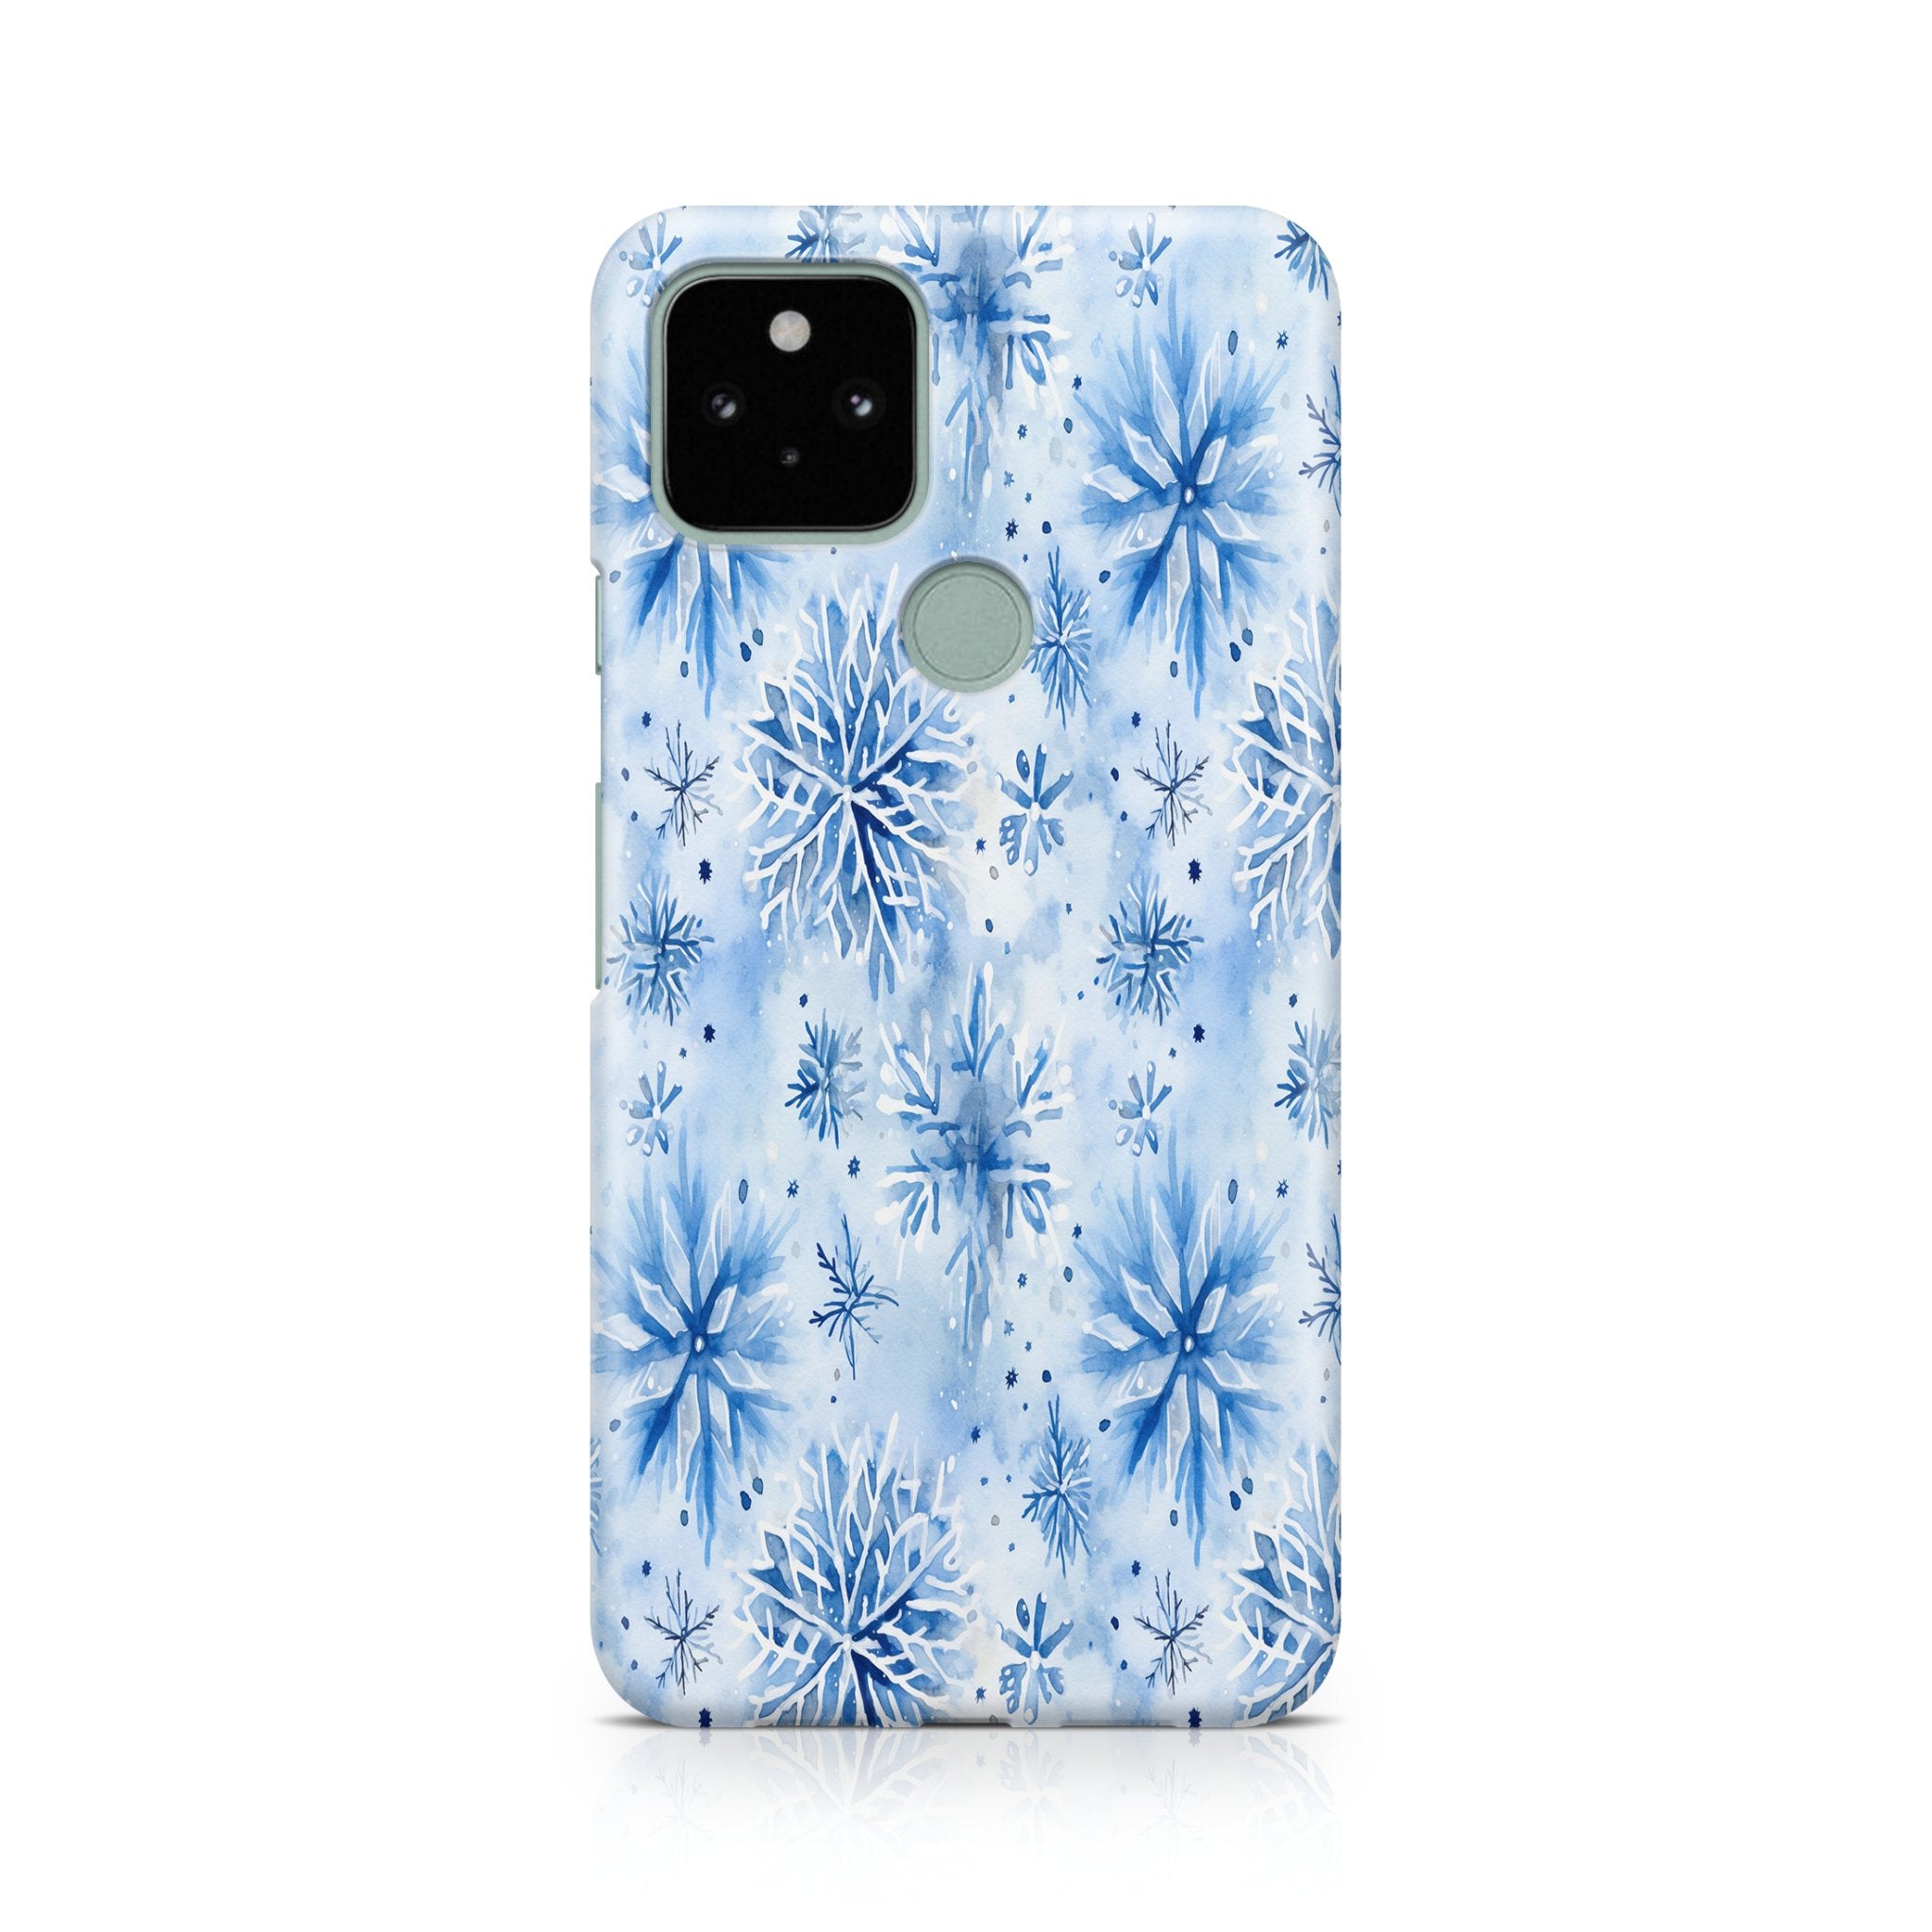 Serenity Snowflake - Google phone case designs by CaseSwagger